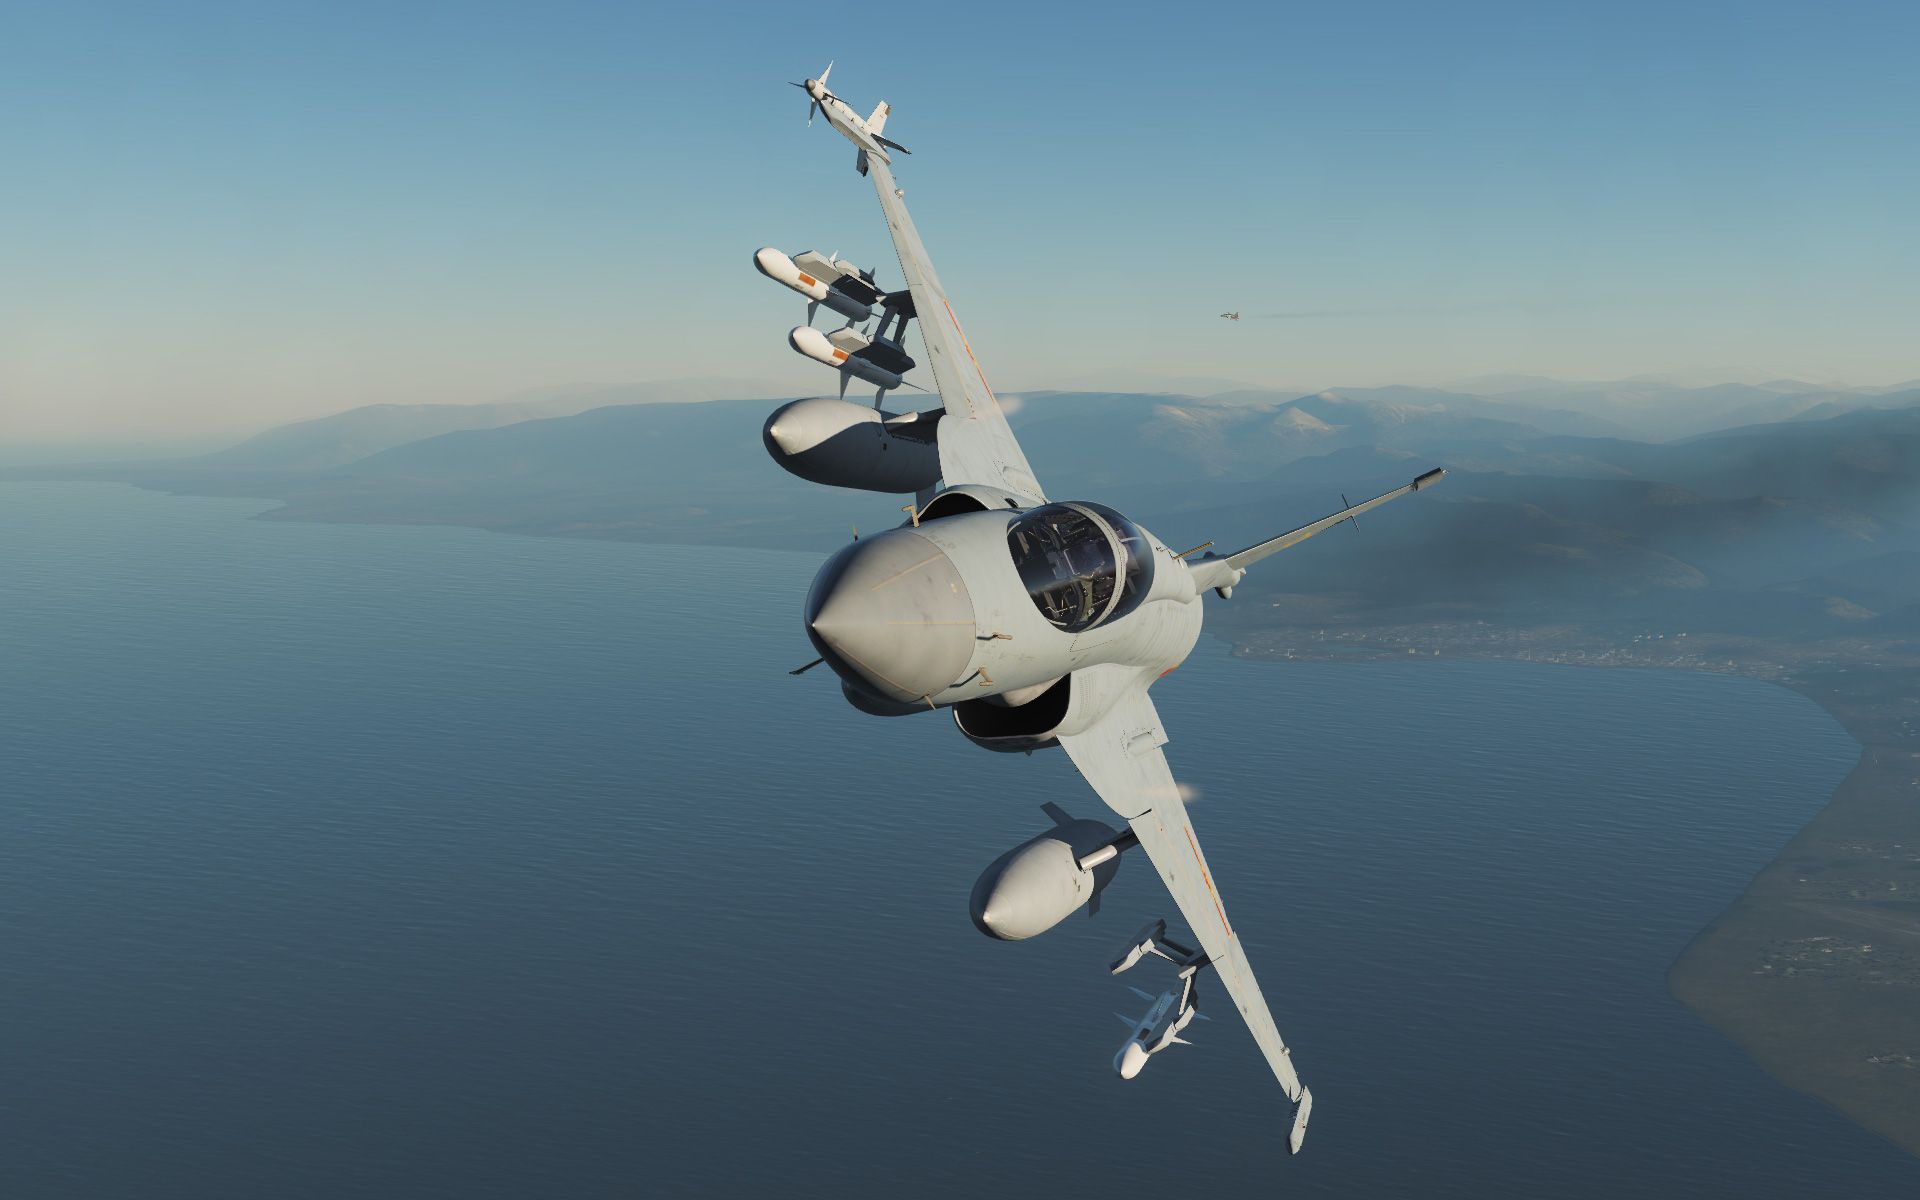 Cac/Pac Jf-17 Thunder Wallpapers